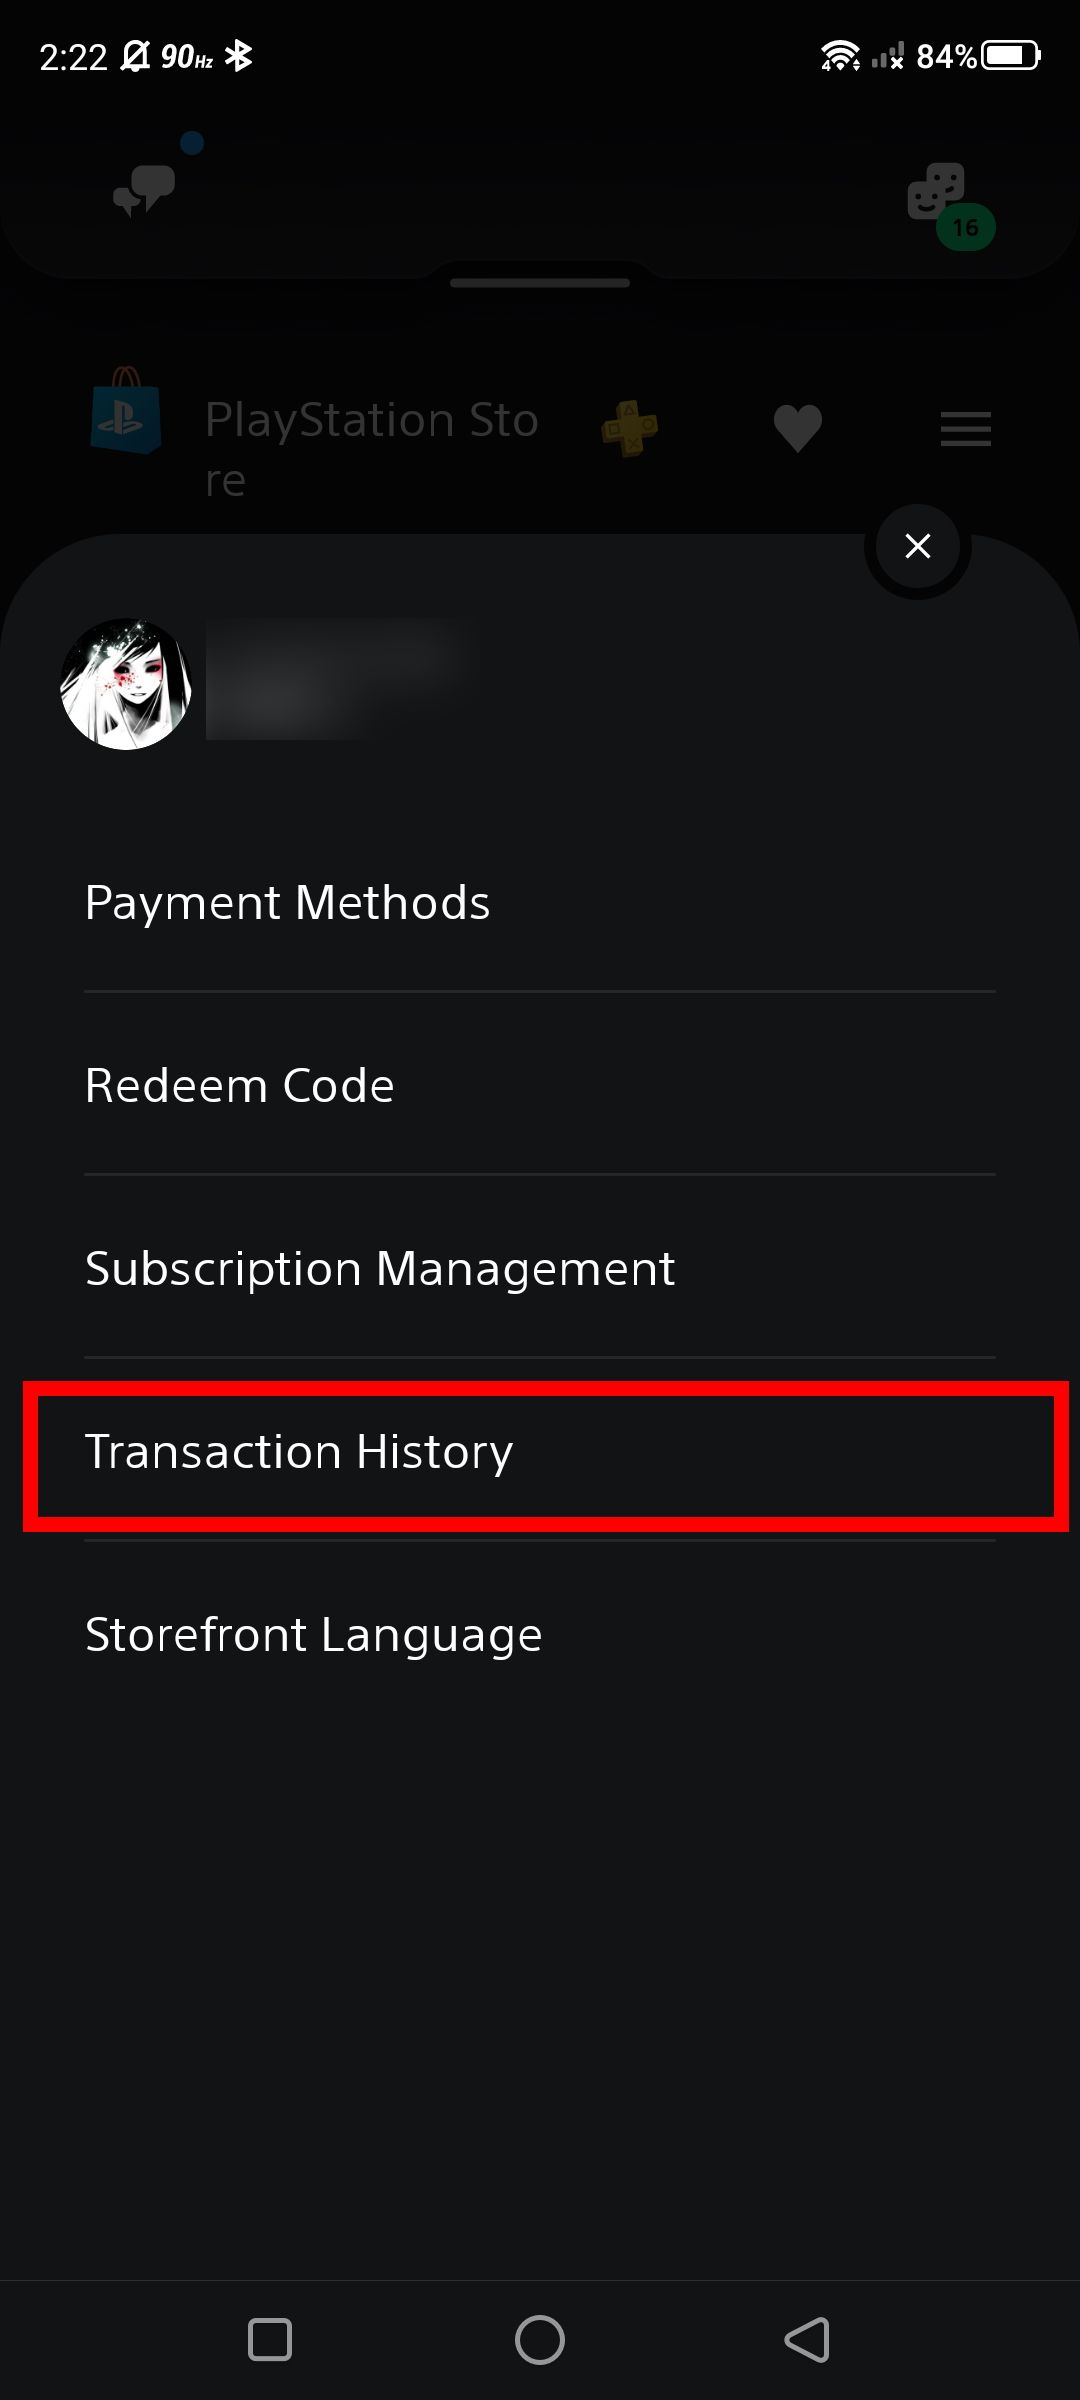 Showcasing the Transaction History option in the PlayStation app on Android